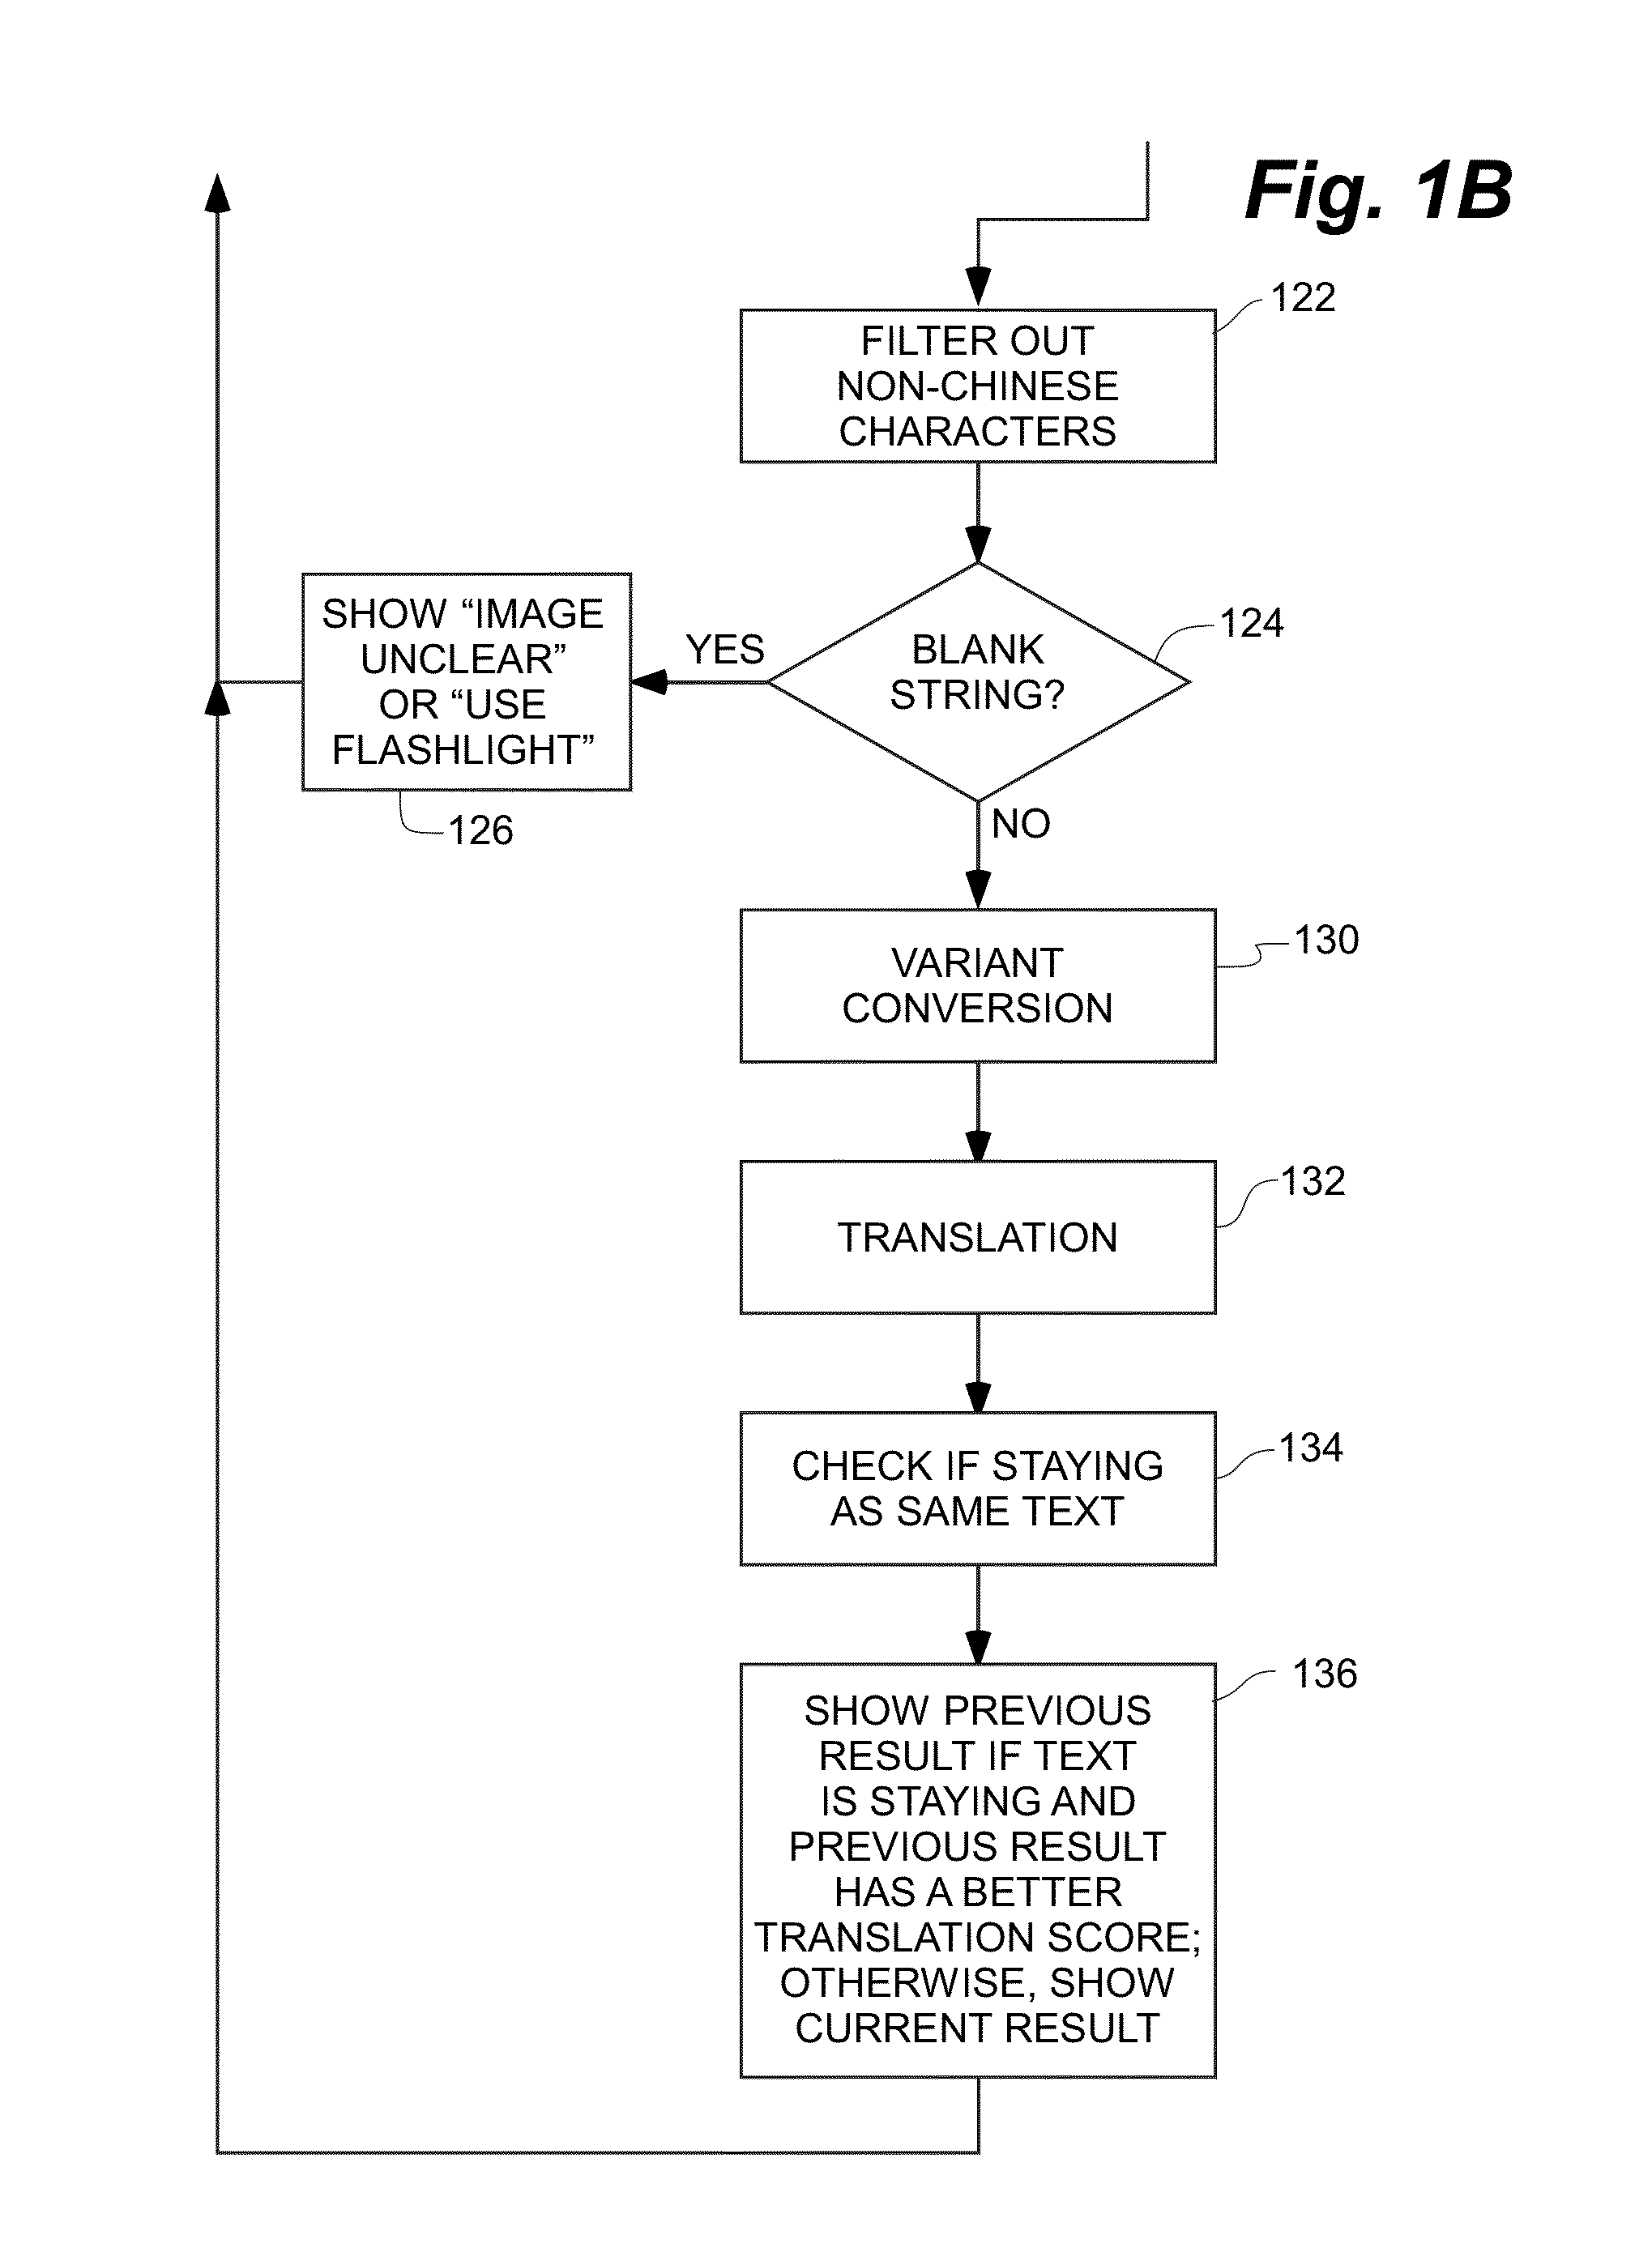 Systems and methods for displaying foreign character sets and their translations in real time on resource-constrained mobile devices